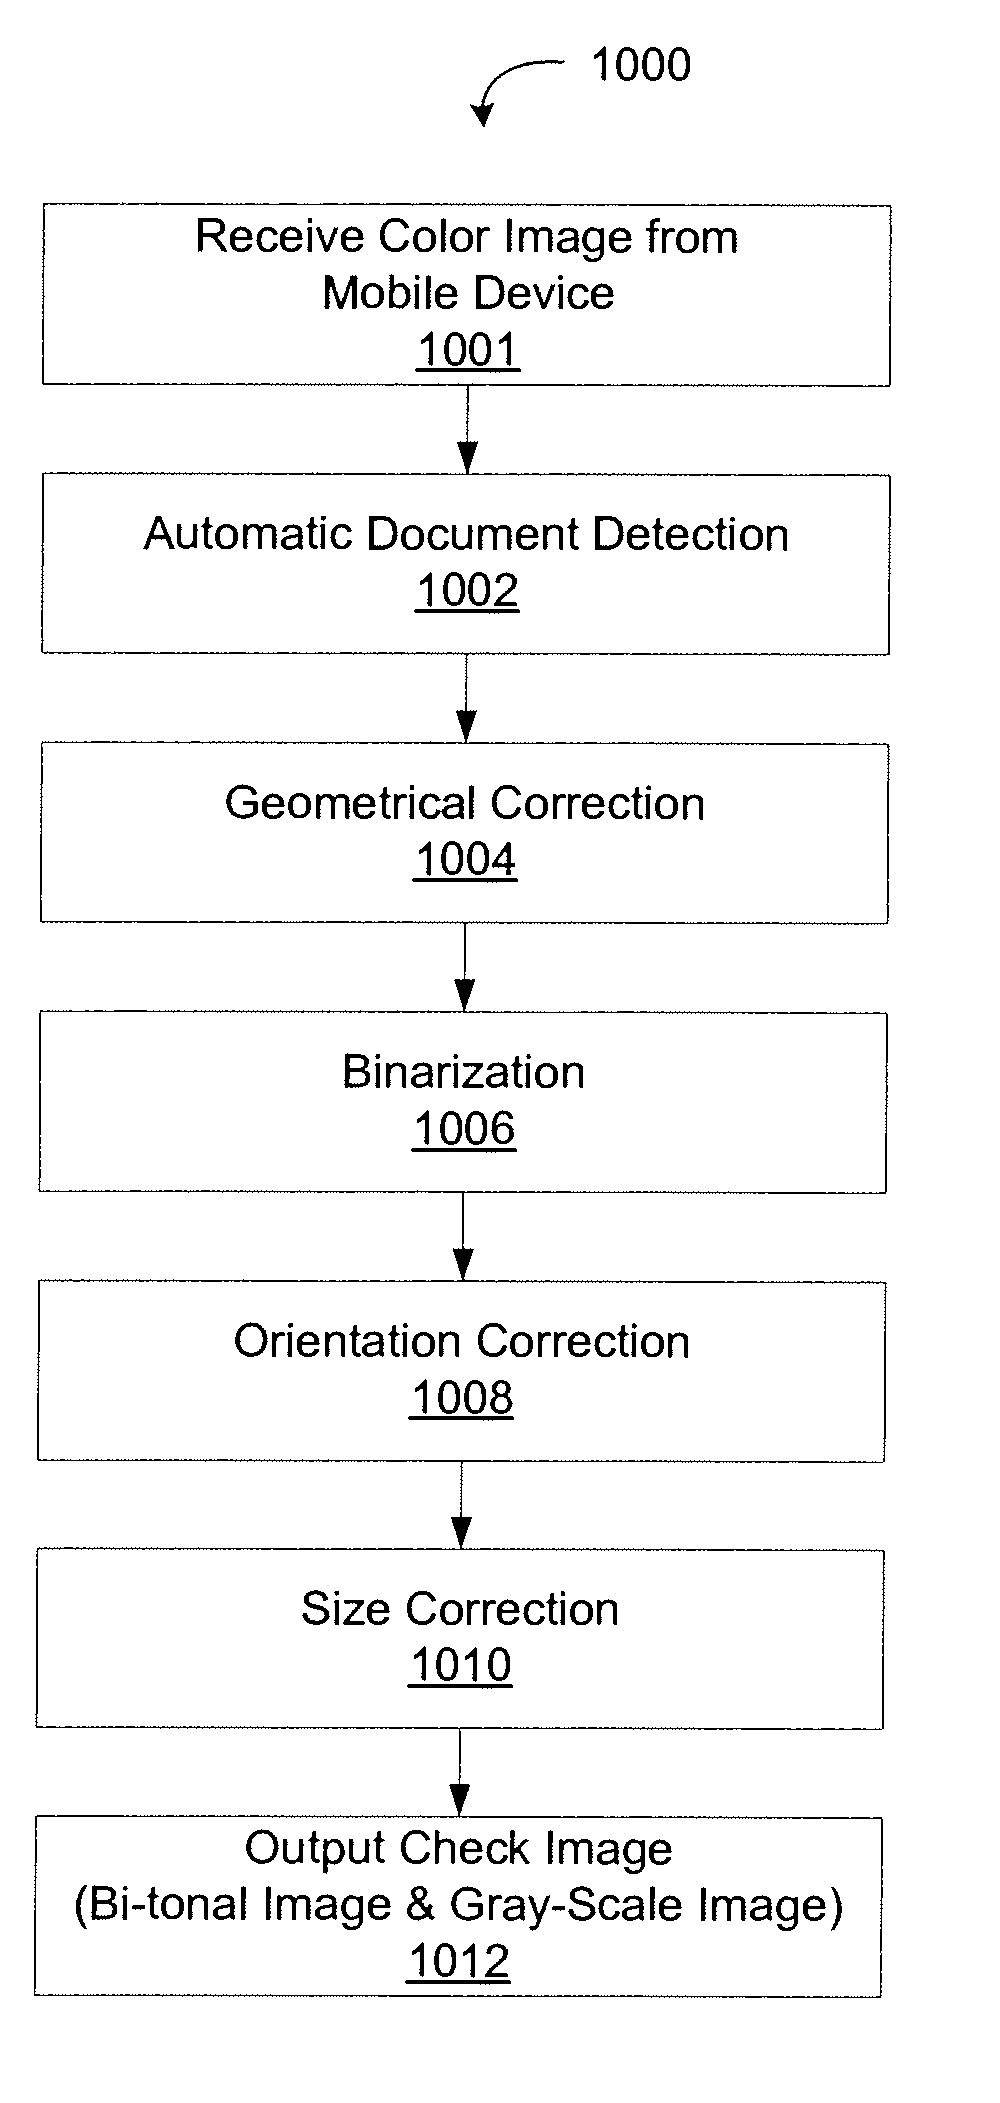 Systems for mobile image capture and processing of checks